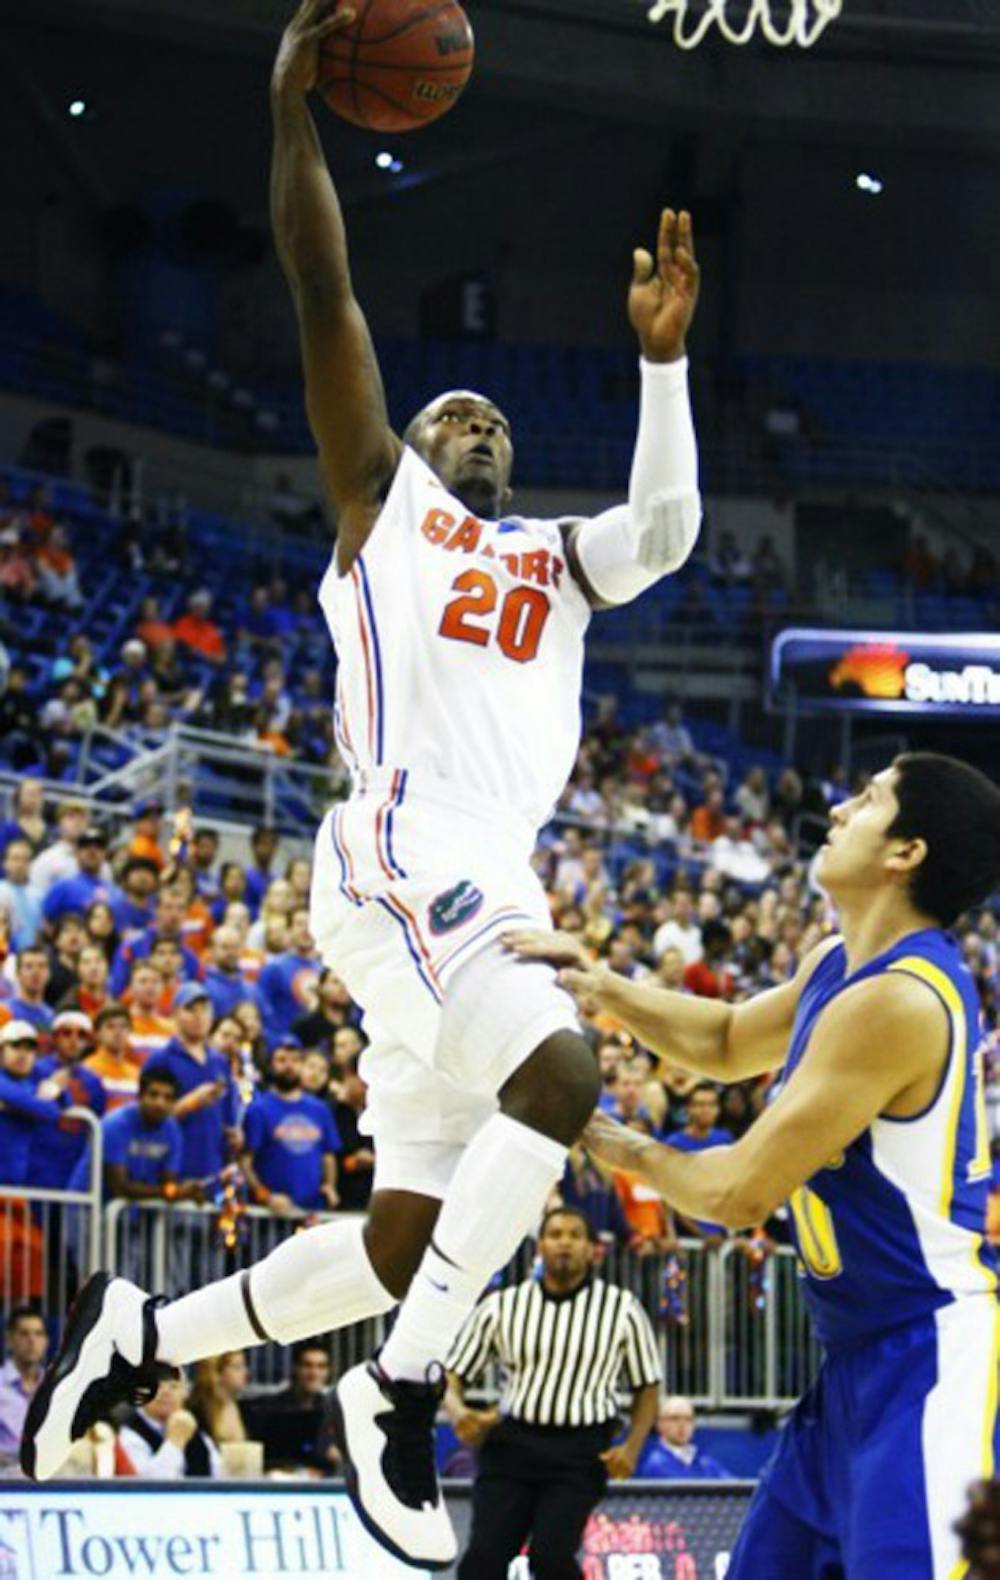 <p>Michael Frazier II attempts a layup during Florida’s 101-71 victory against Nebraska-Kearney on Nov. 1 in the O’Connell Center.</p>